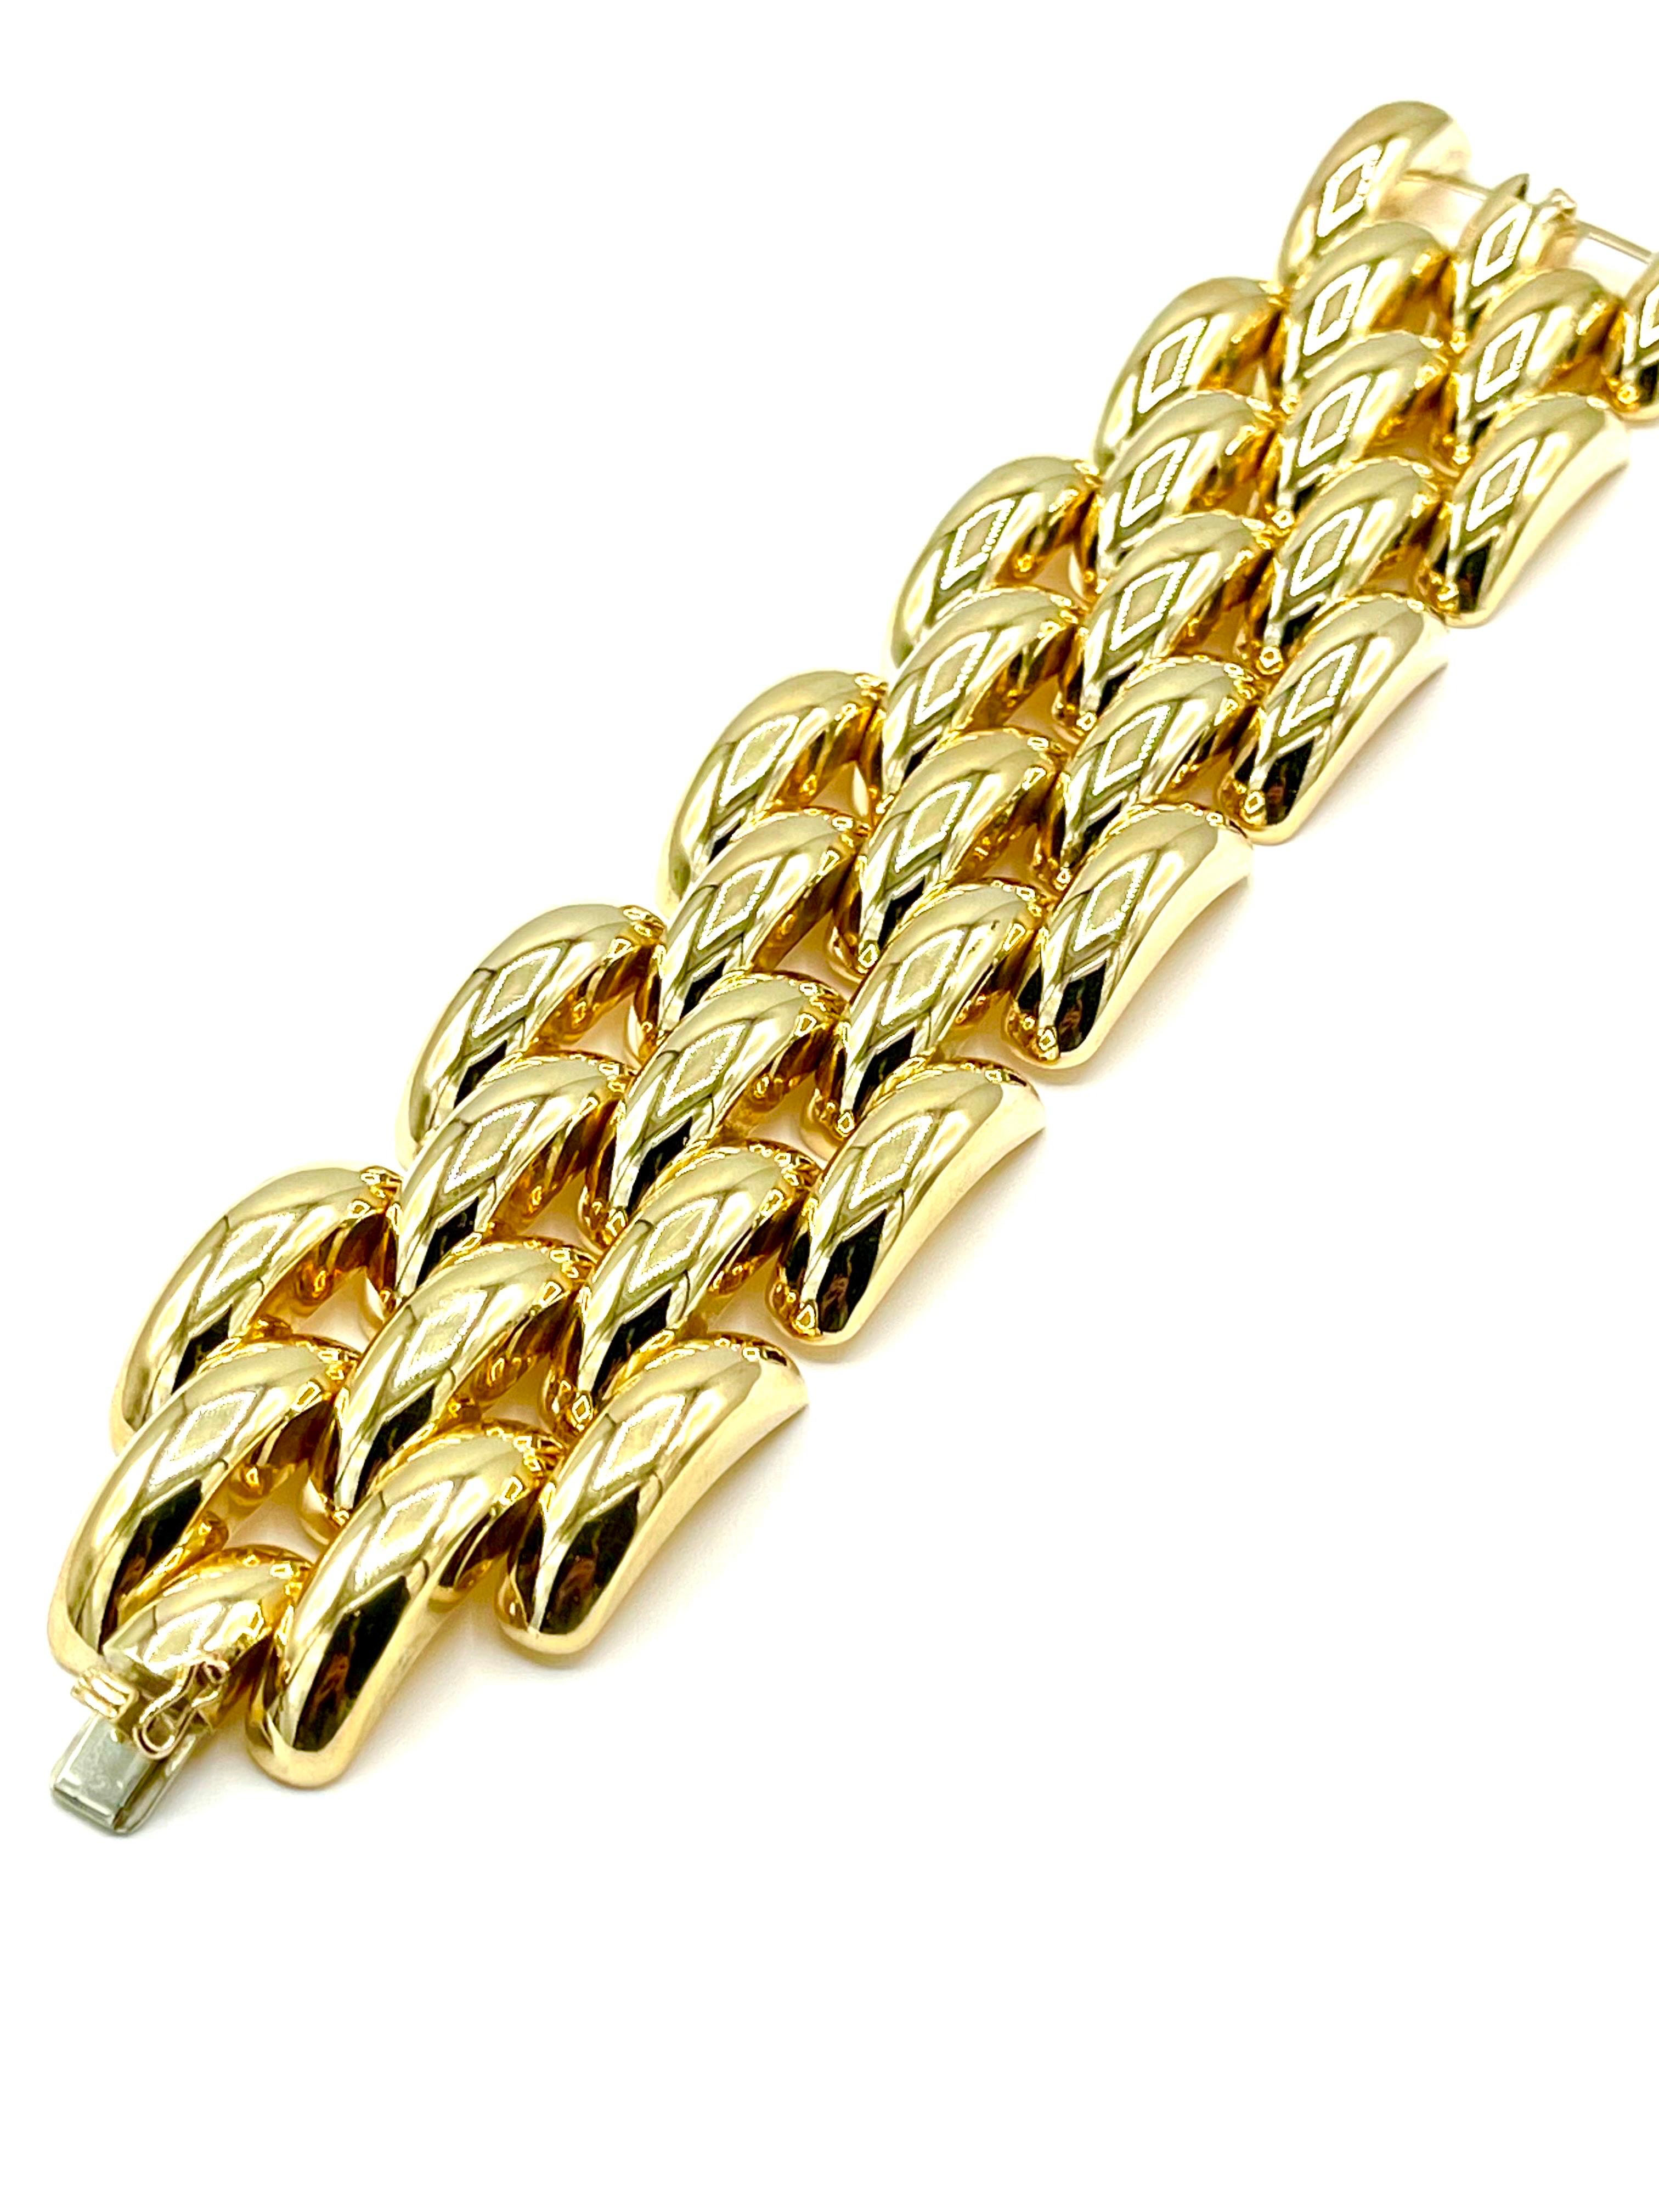 This is a beautiful wide bracelet.  It consists of five rows of links, with a hidden clasp.  The bracelet measures 8.25 inches in length, and 1.60 inches in width, made in 14K yellow gold.  Offered by Charles Schwartz and Son Jewelers.